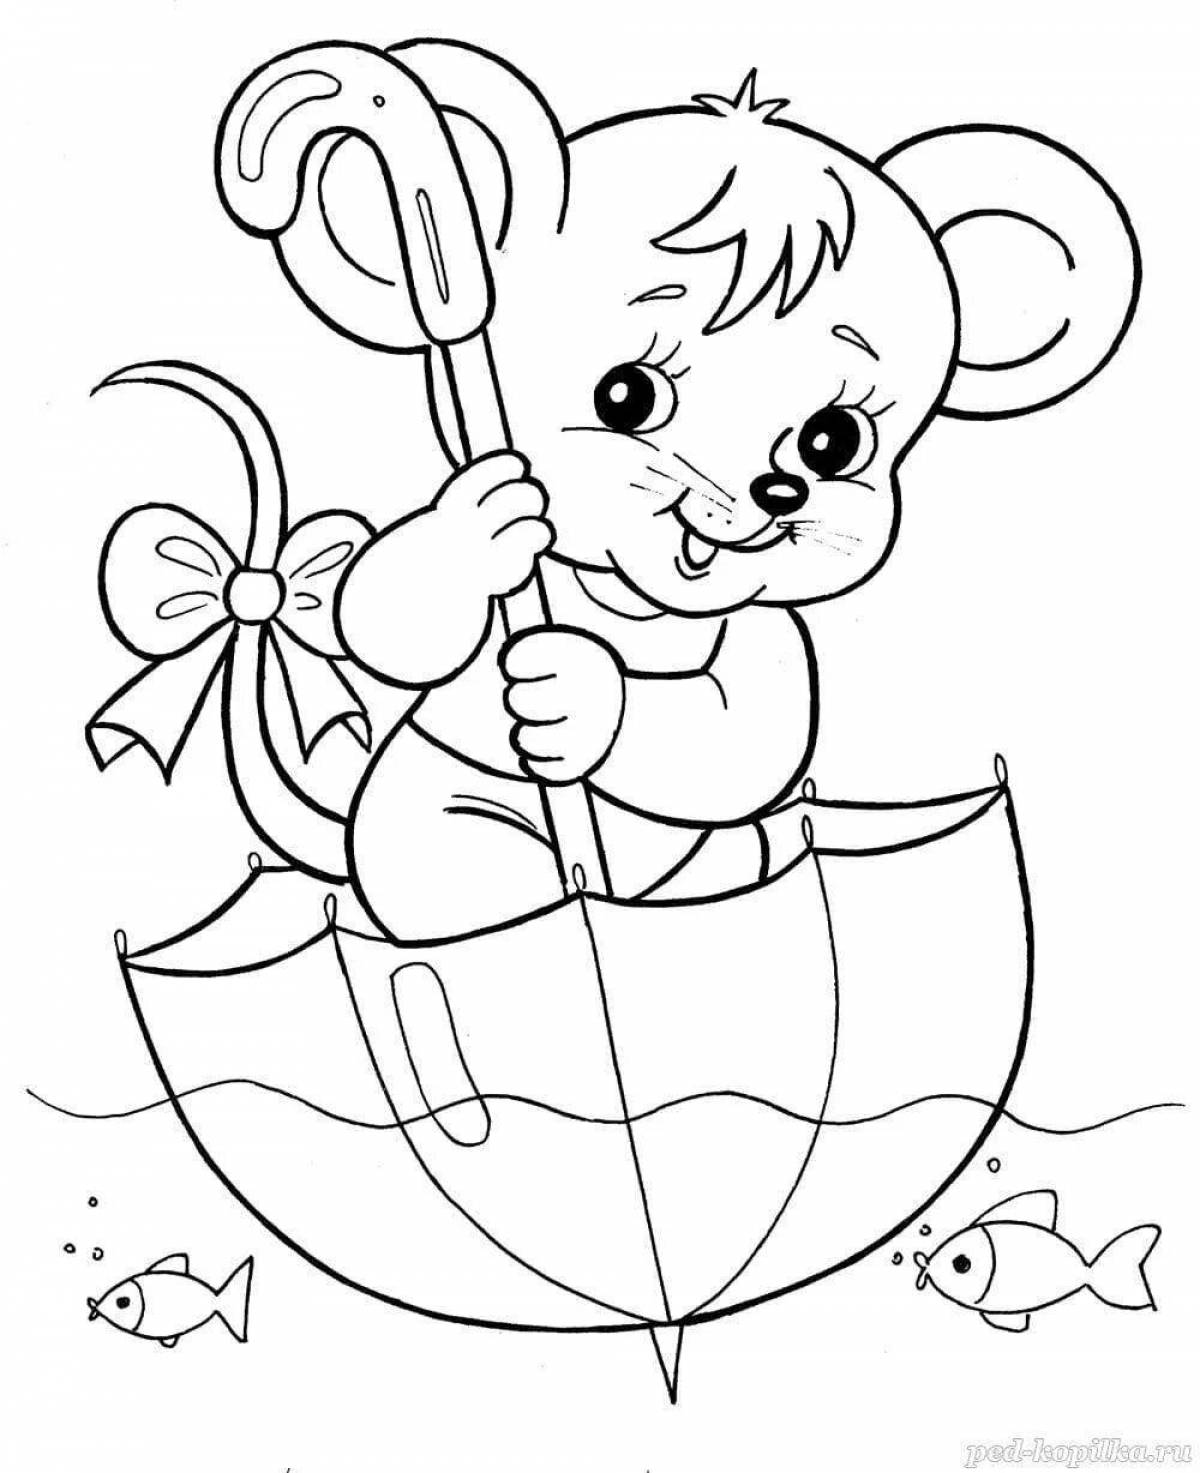 Creative coloring book for kids 5-6 years old